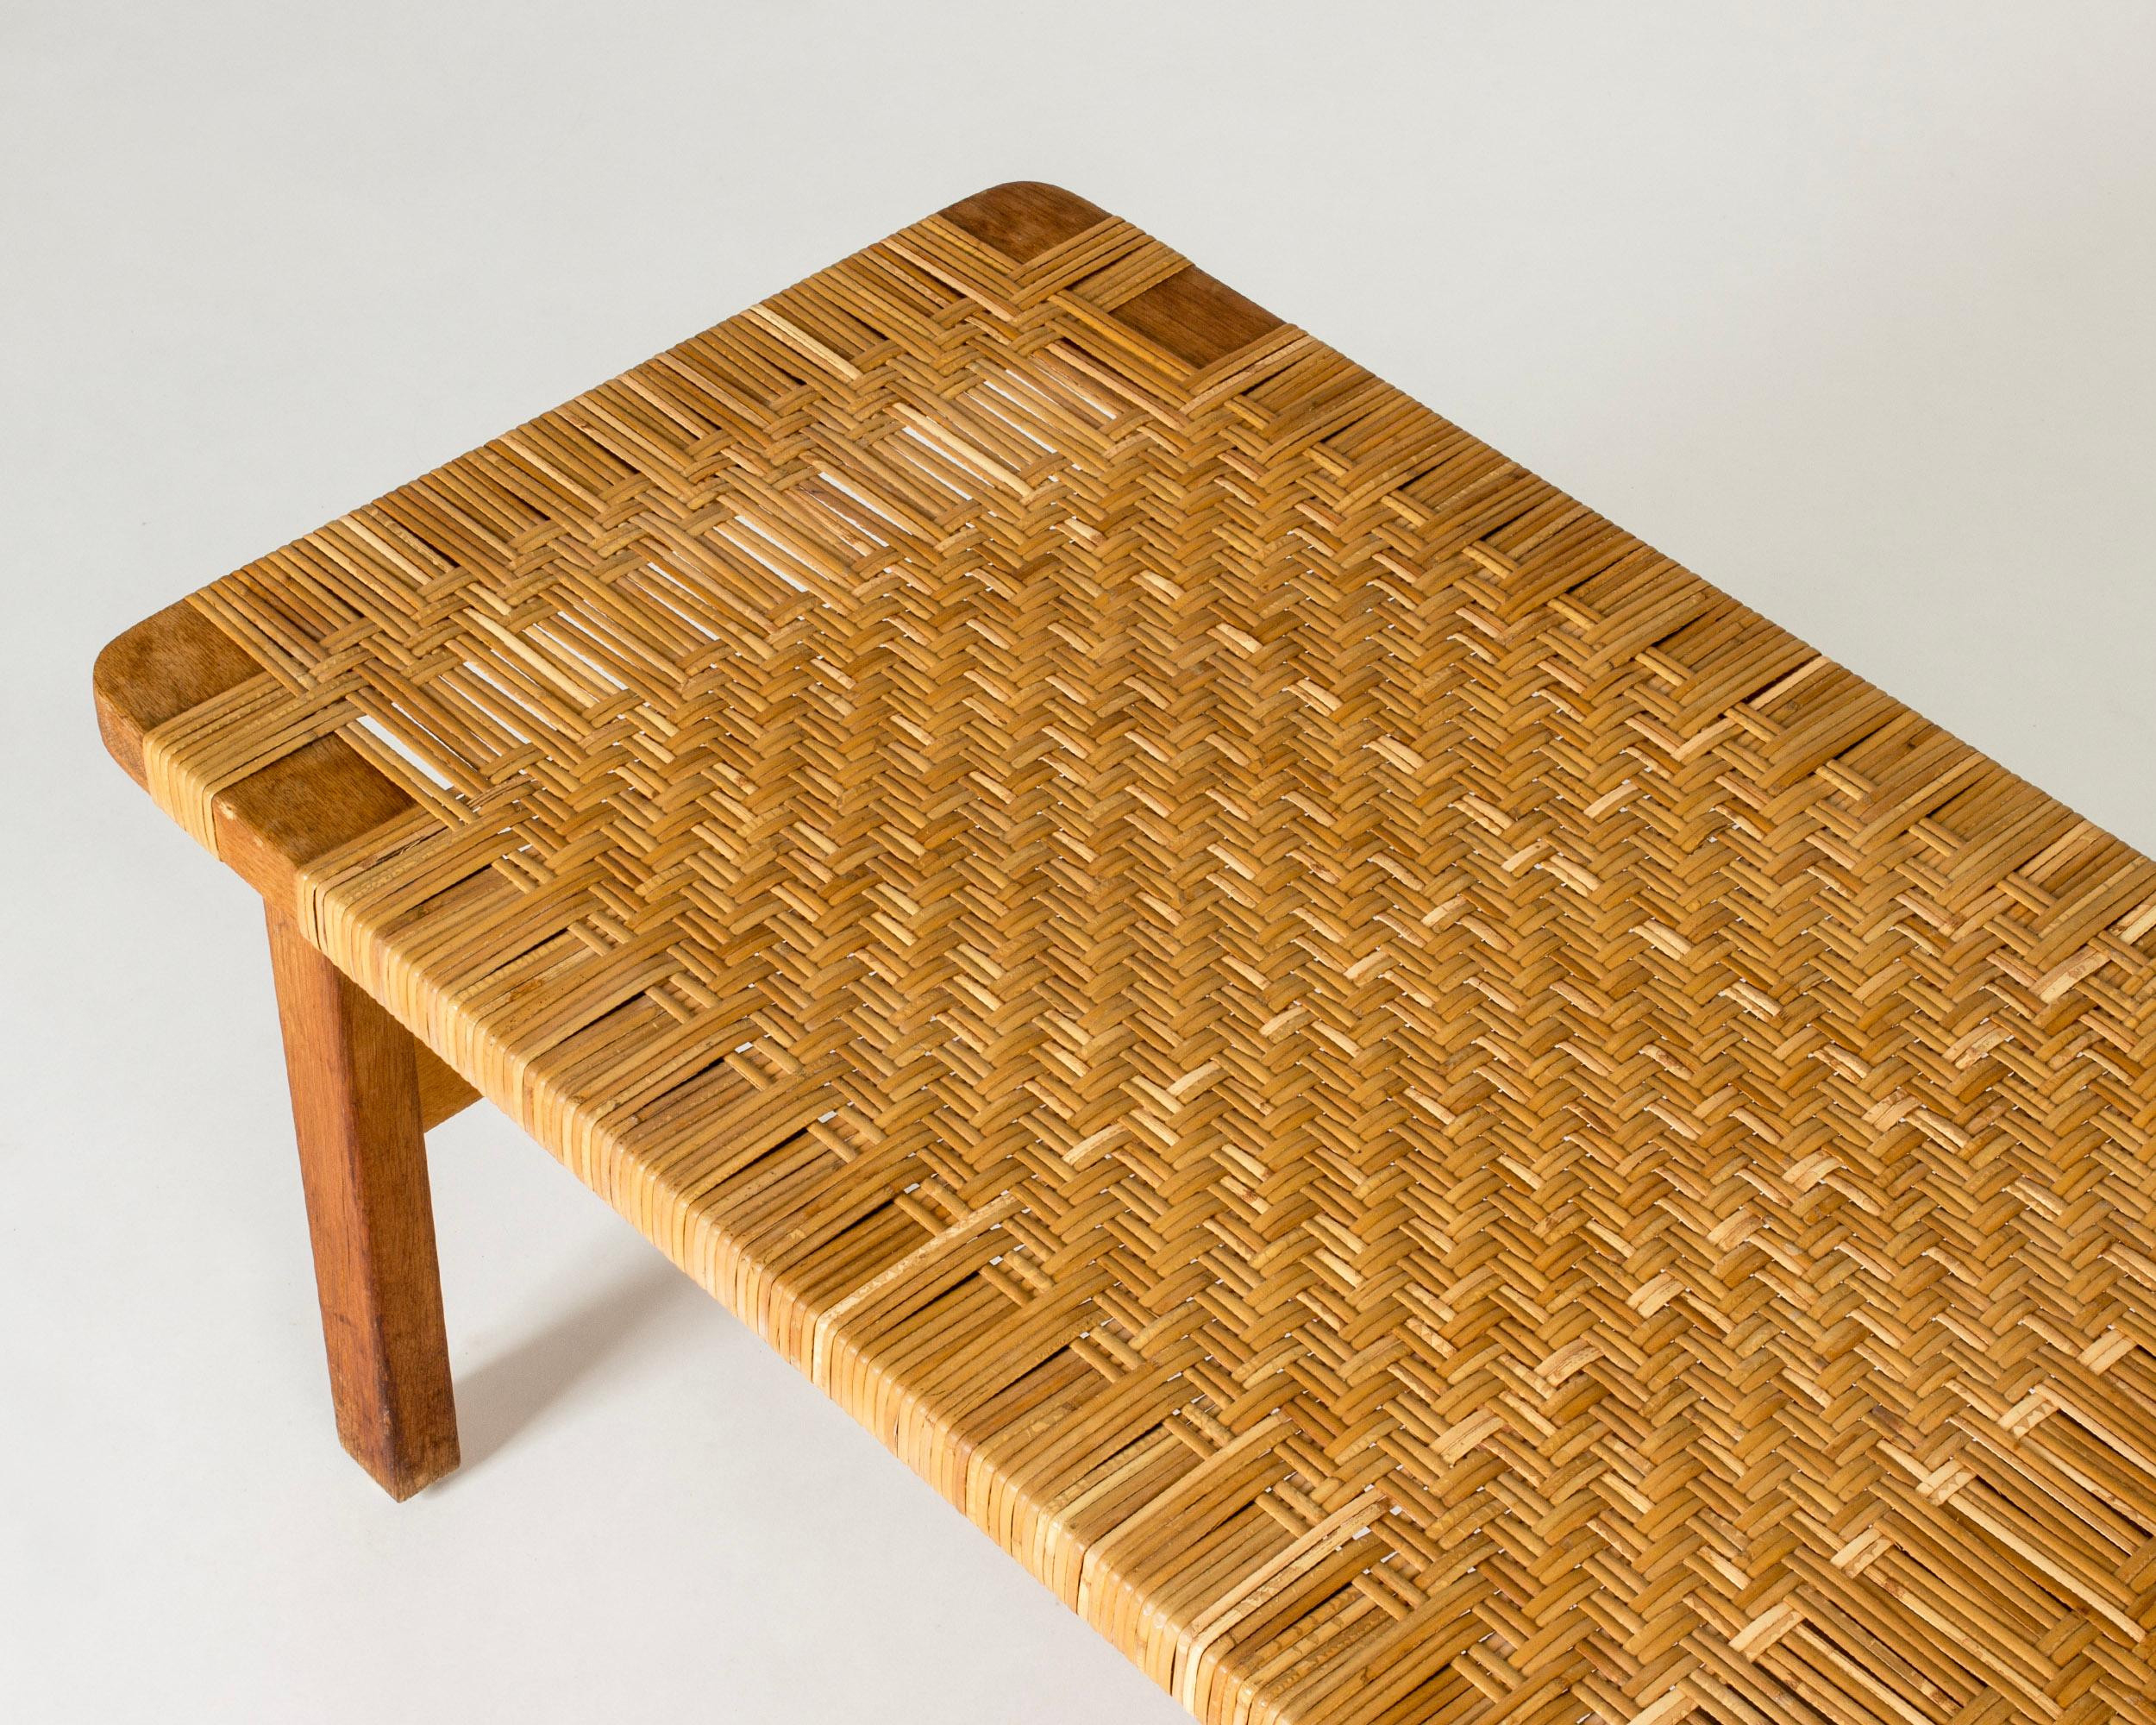 Beautiful oak and rattan bench by Børge Mogensen. Great materials, low design that works both as a bench and a coffee table.